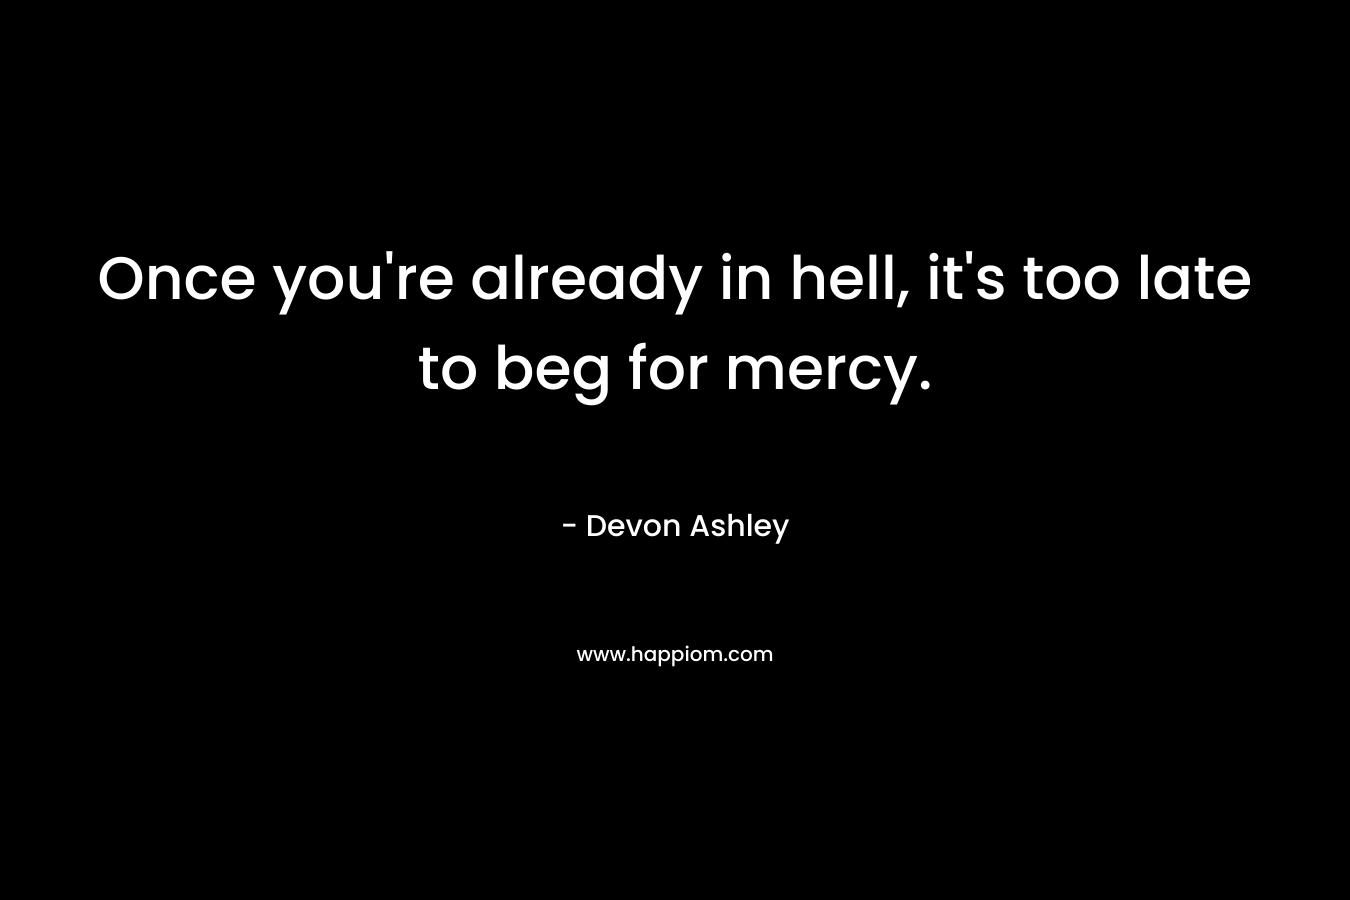 Once you're already in hell, it's too late to beg for mercy.